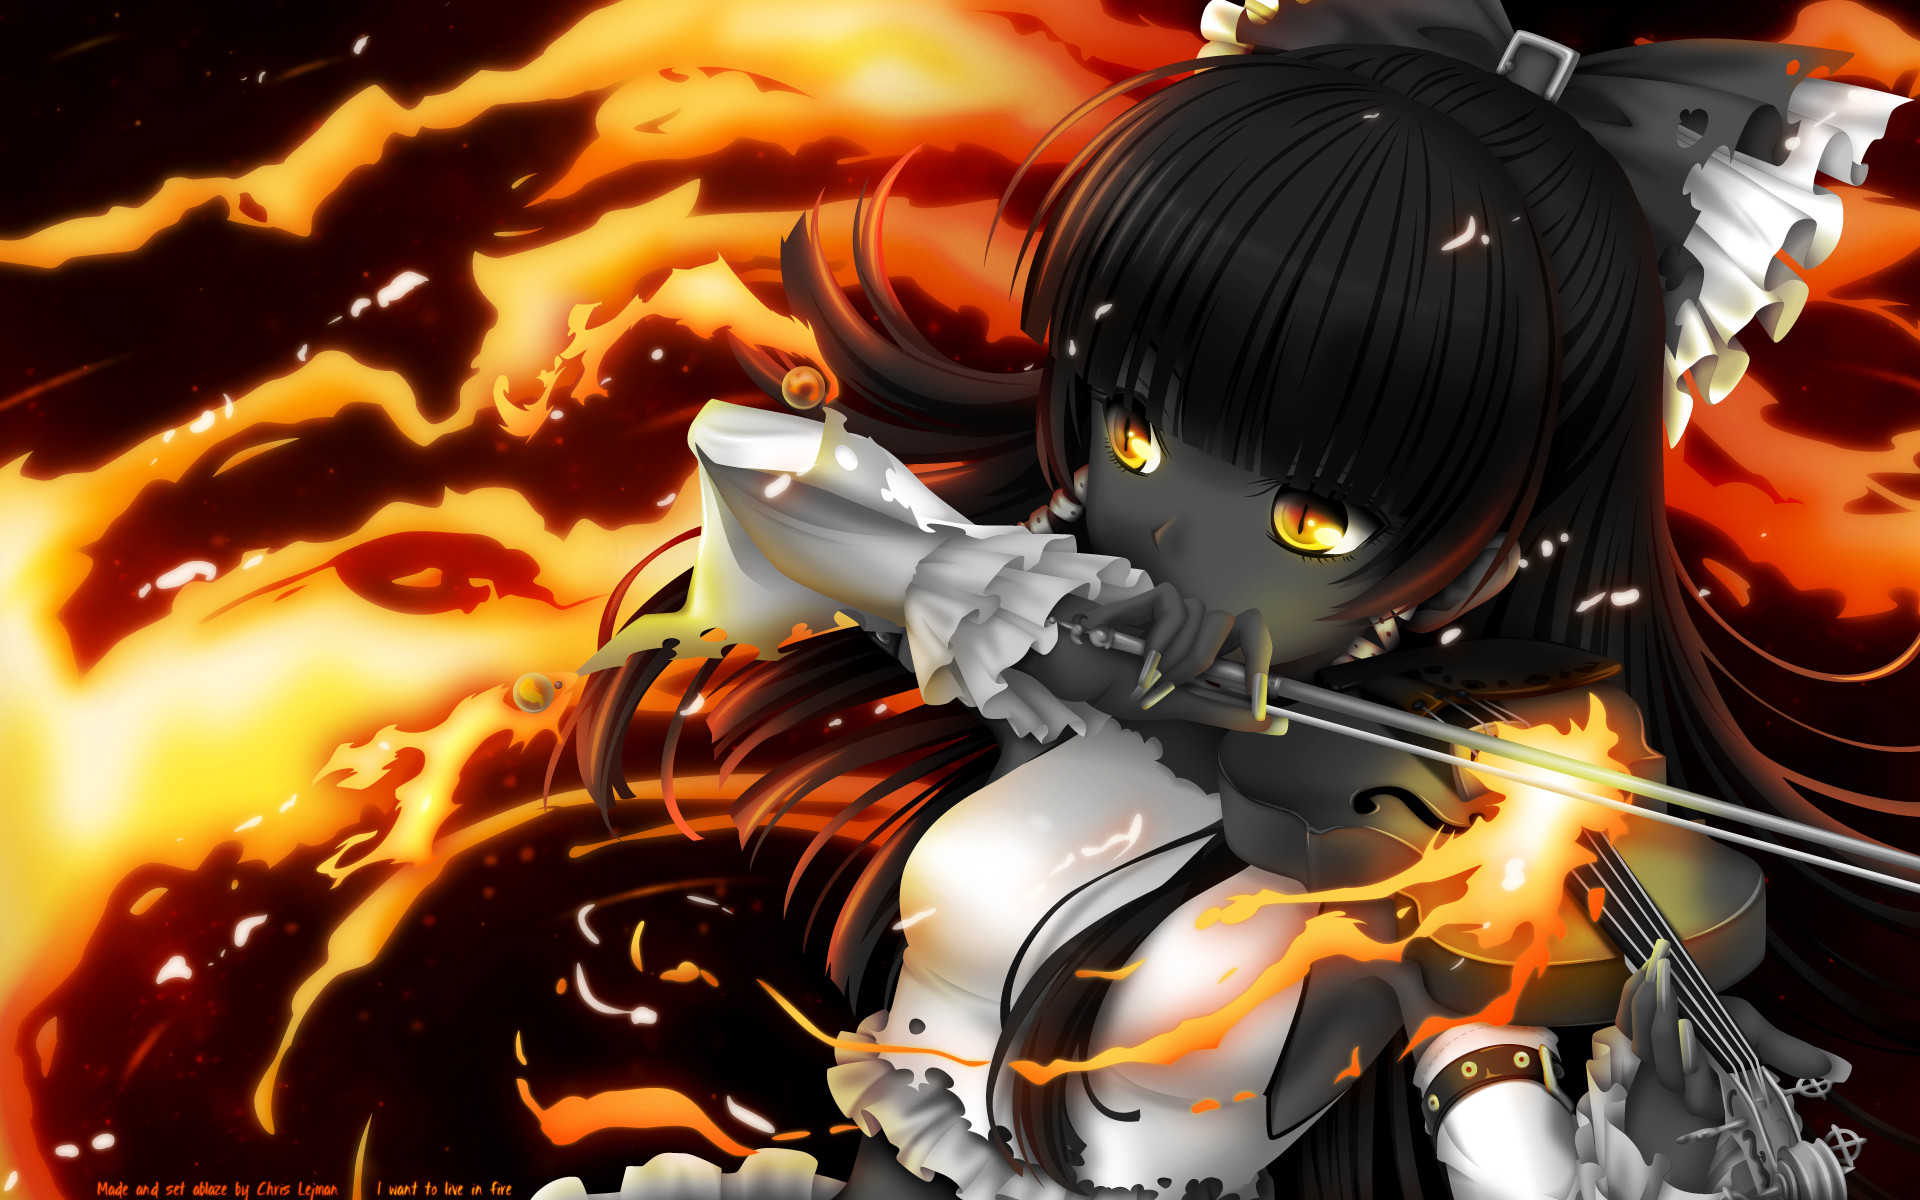 1920x1200 ... I want to live in fire by Deto15